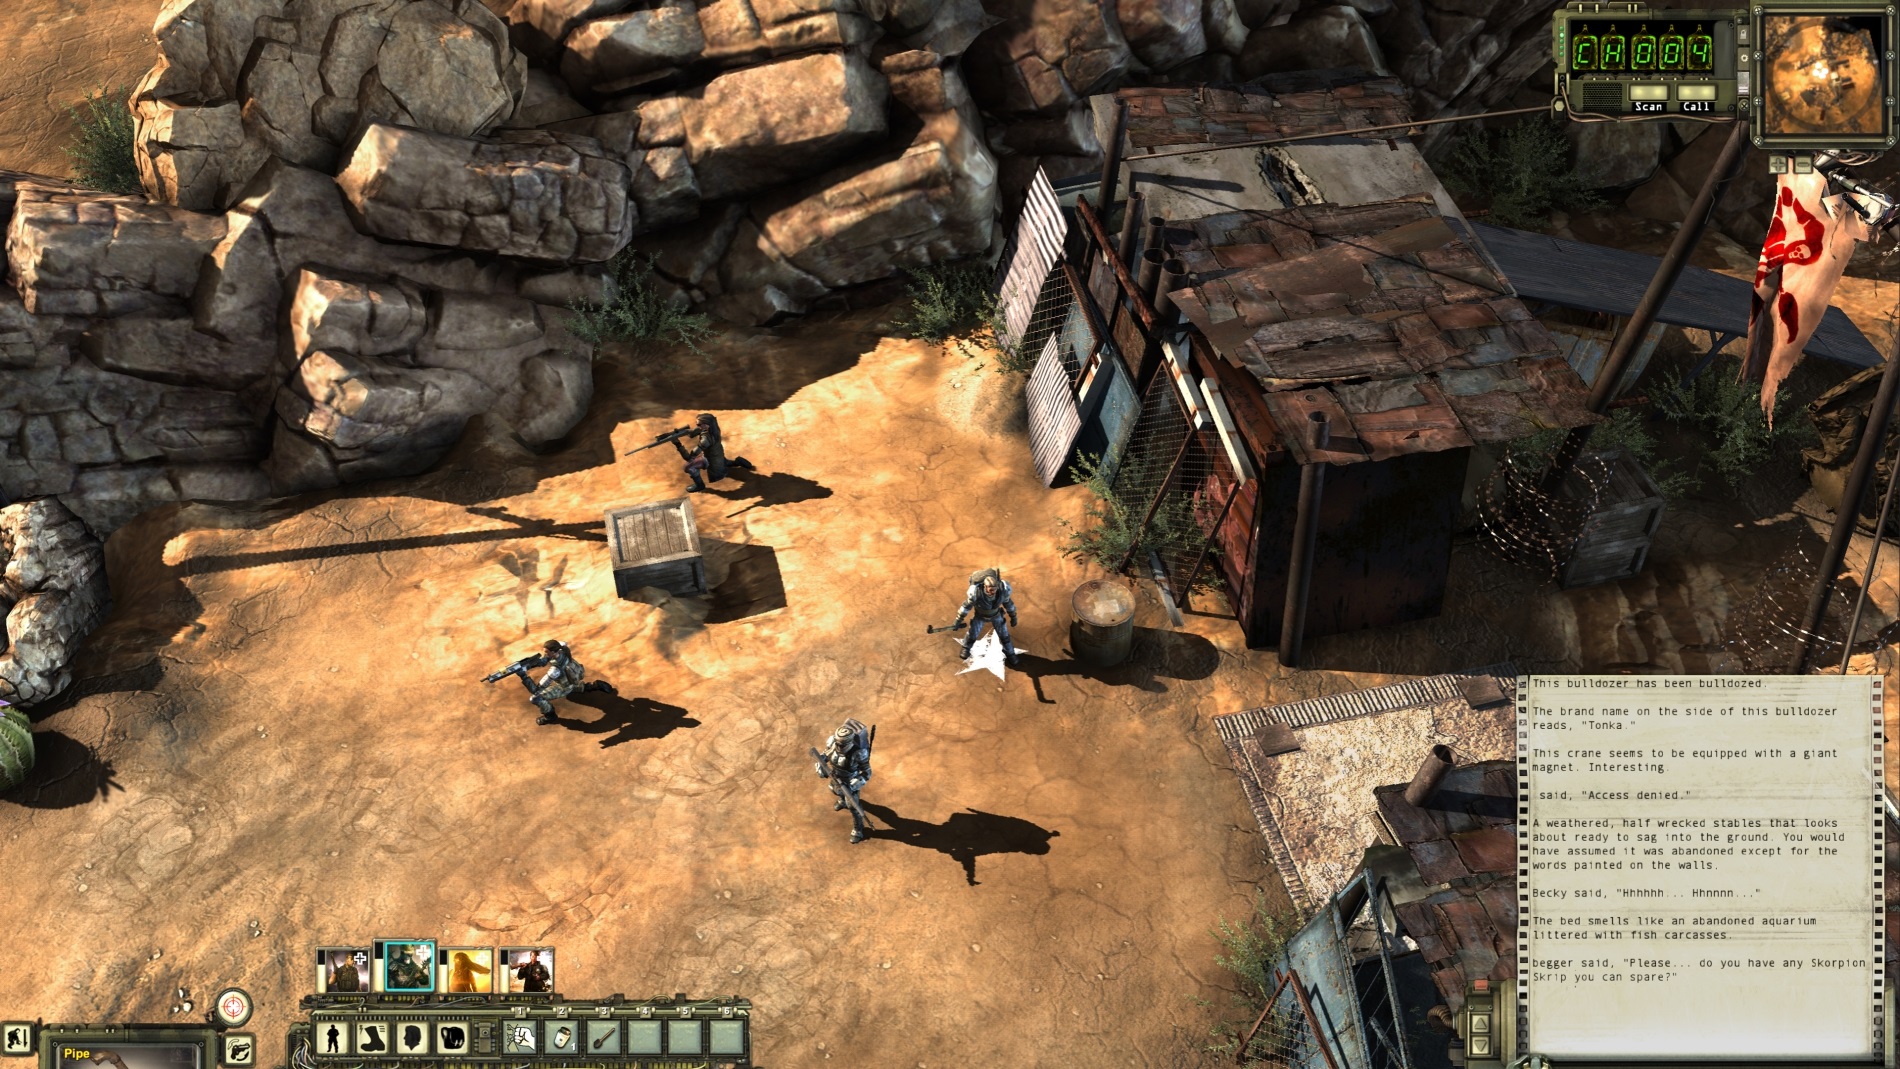 Wasteland 2, Prison, Party, Post-apocalyptic, Game, Turn-based, Tactics, RPG